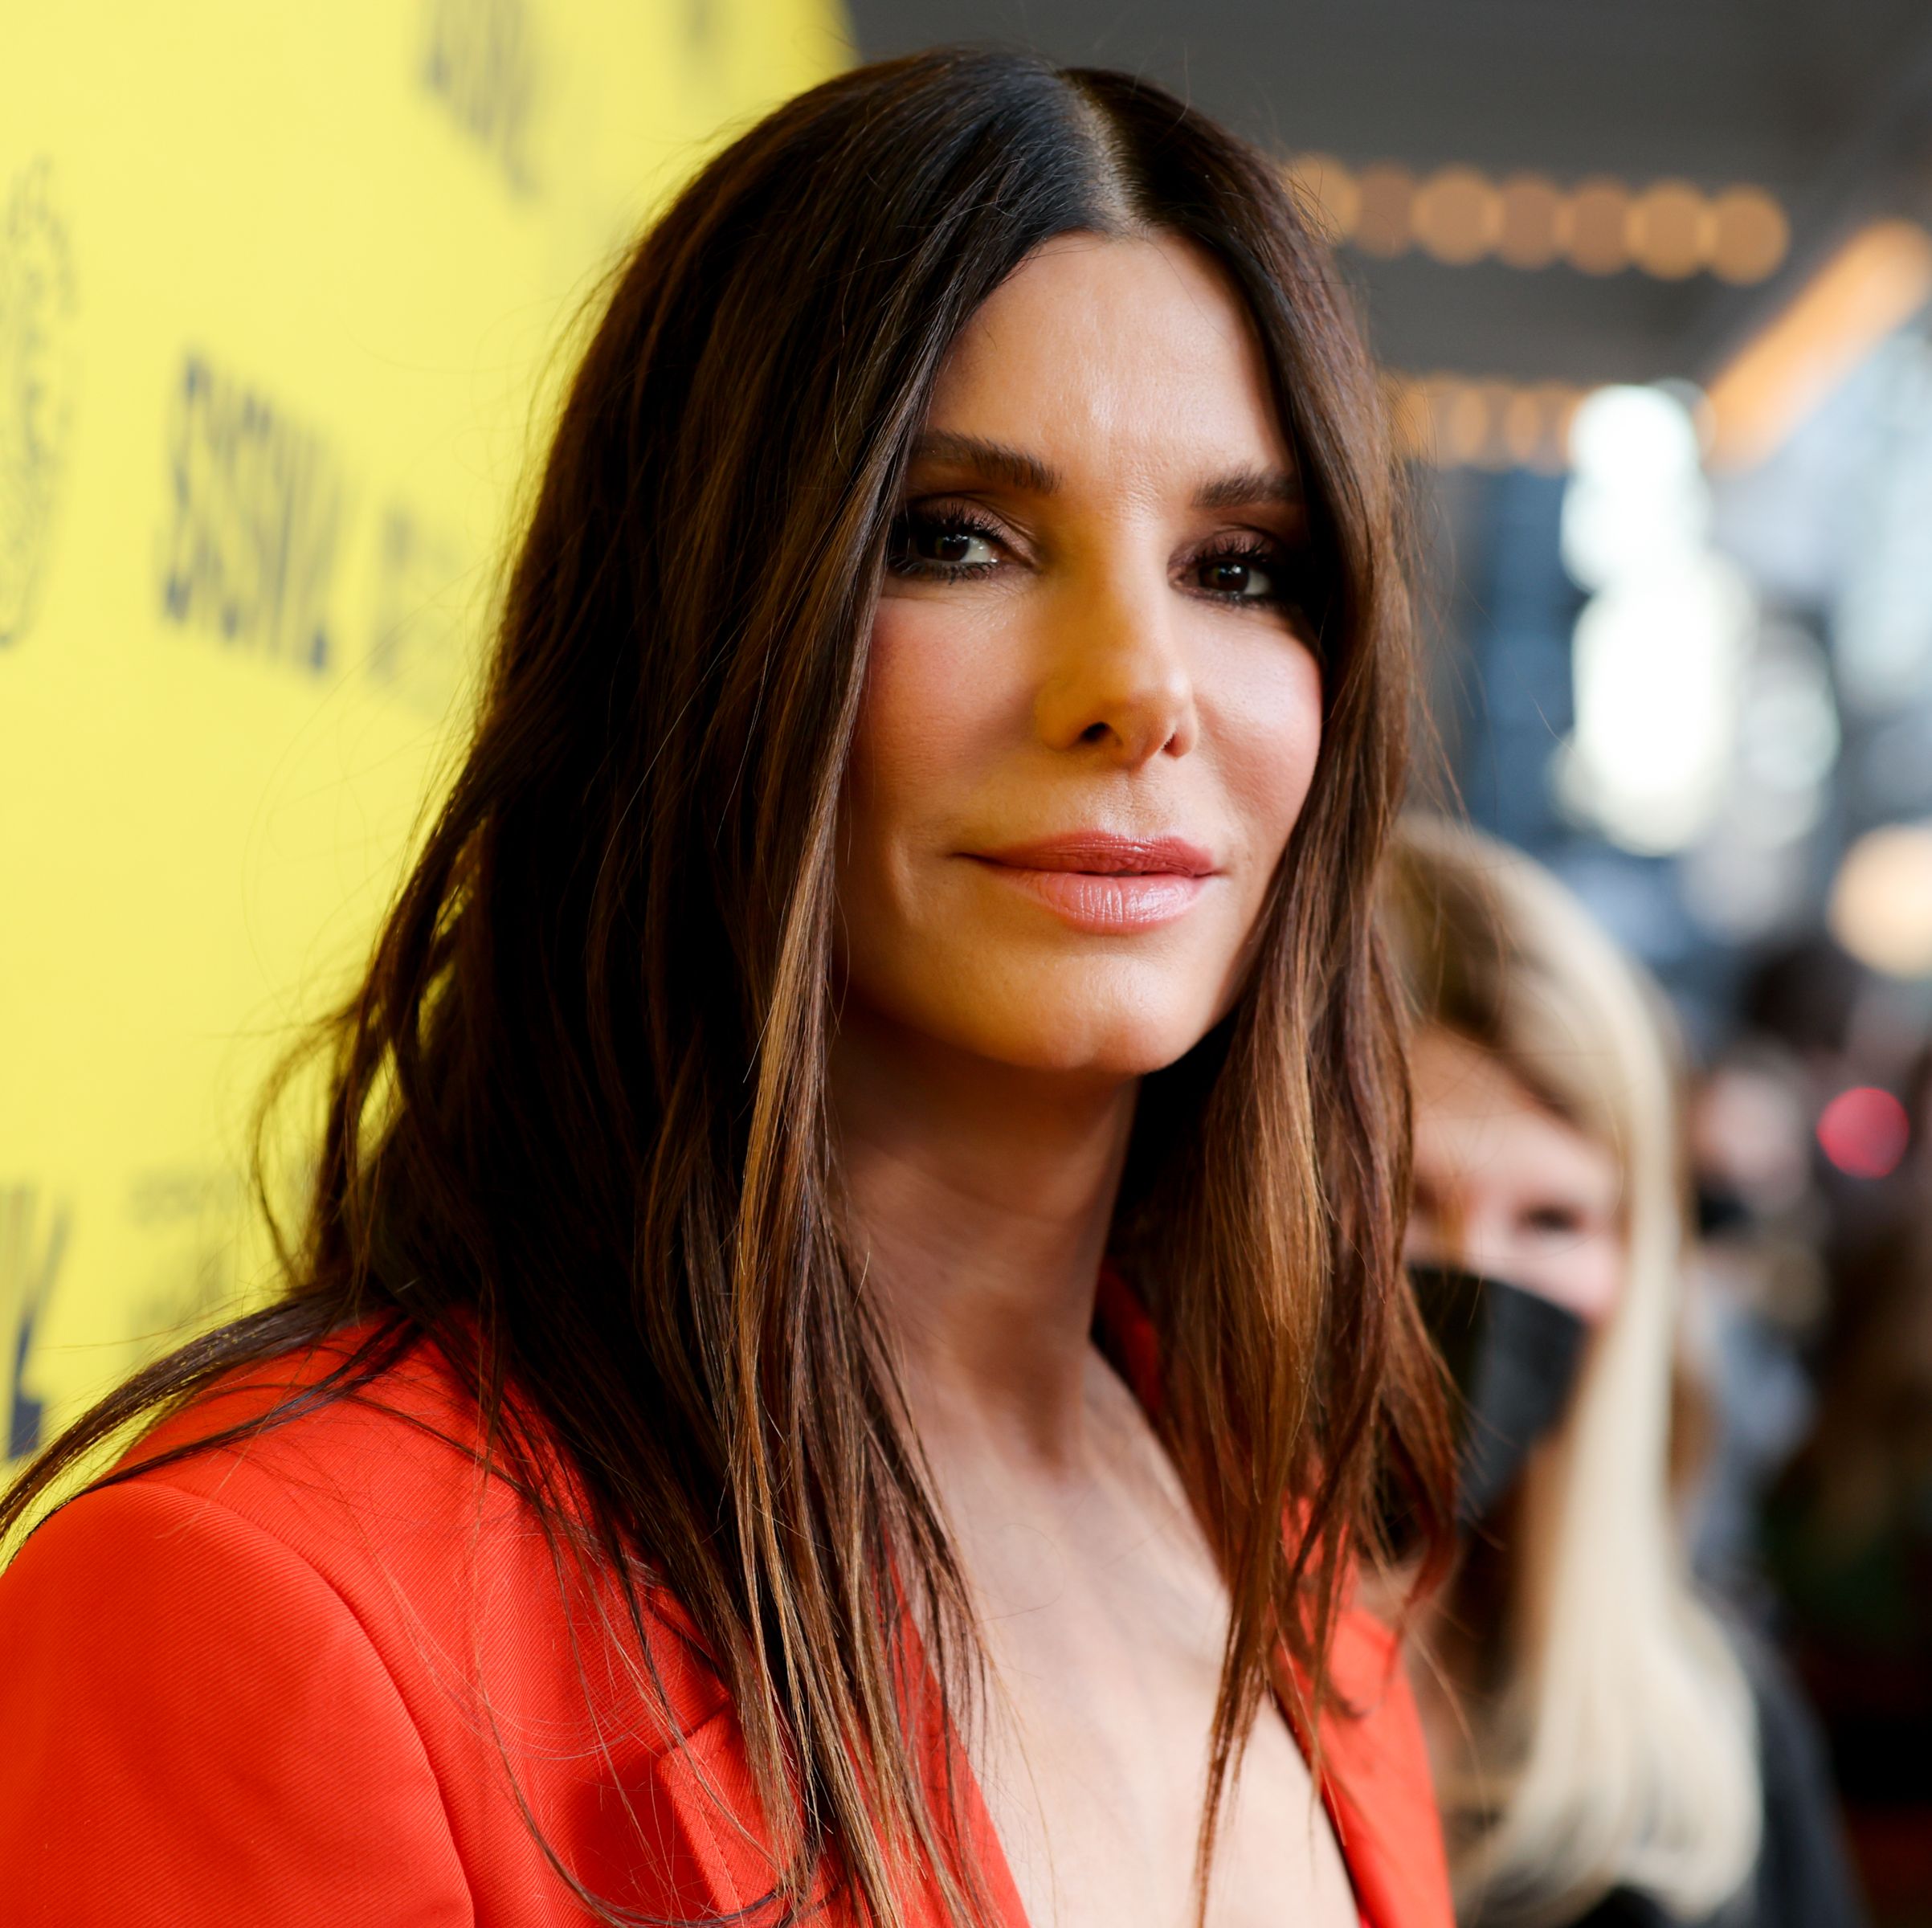 I Took a Look at Sandra Bullock's Net Worth, and My Life Will Never Be the Same